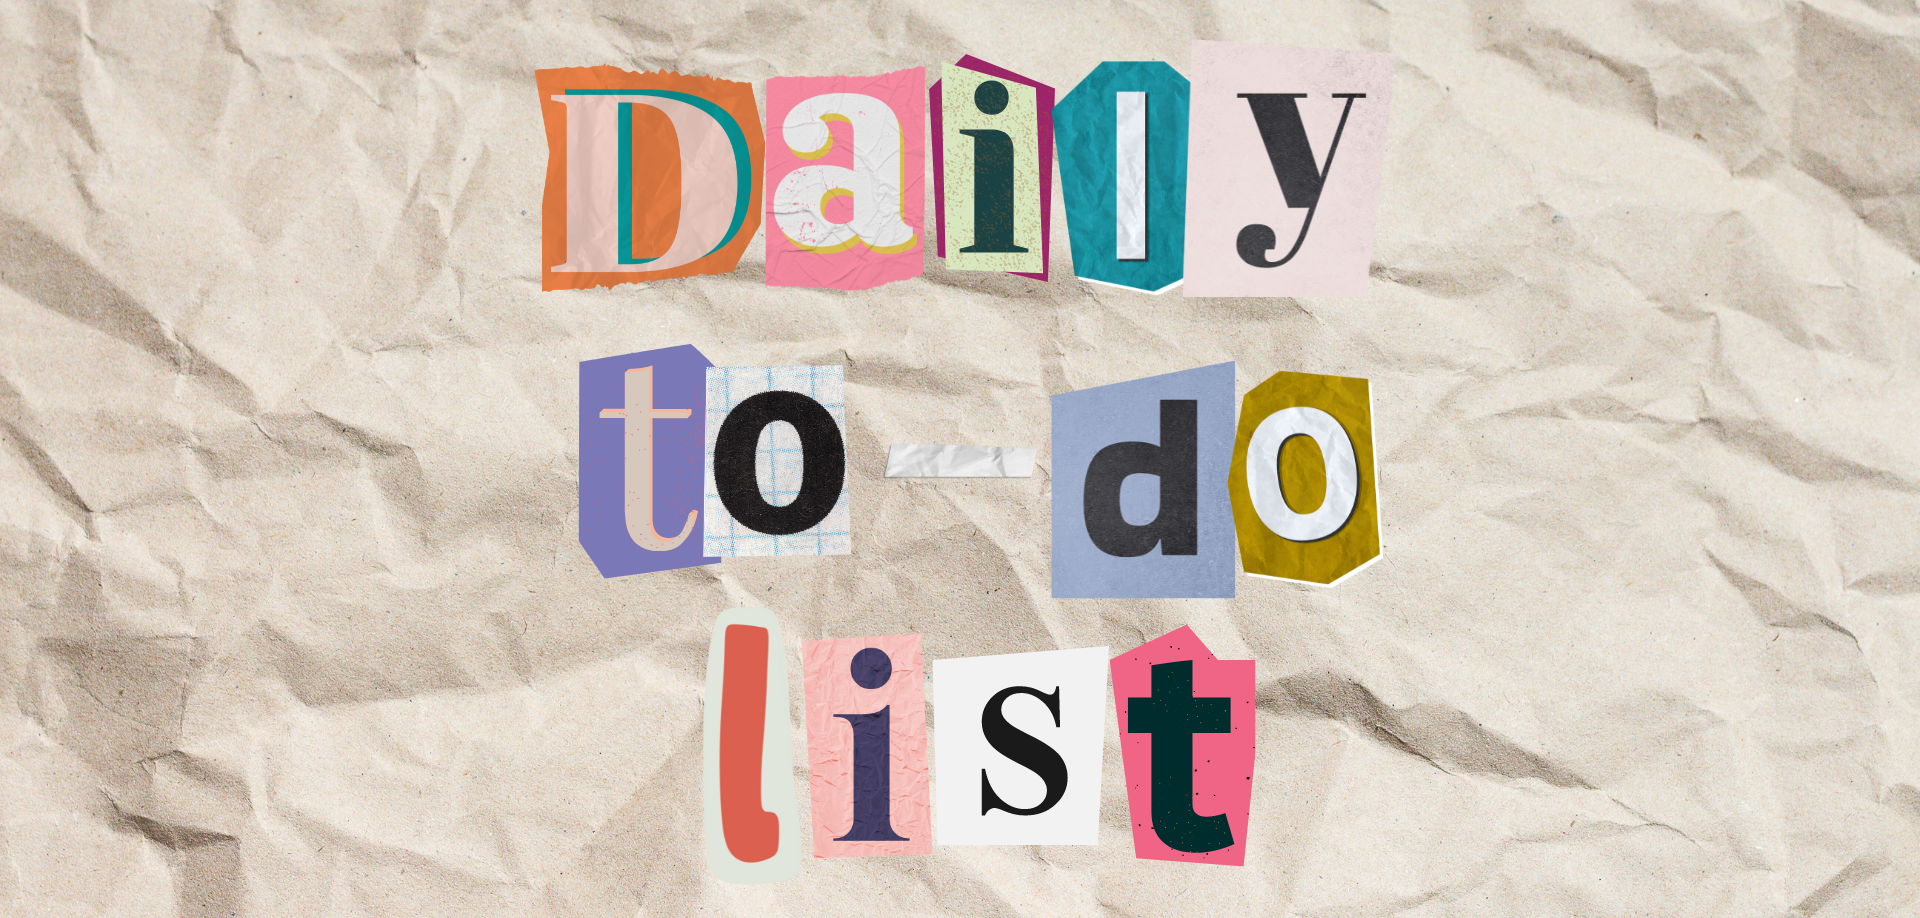 Cut-out letters on wrinkled paper spell &quot;Daily to do list&quot;